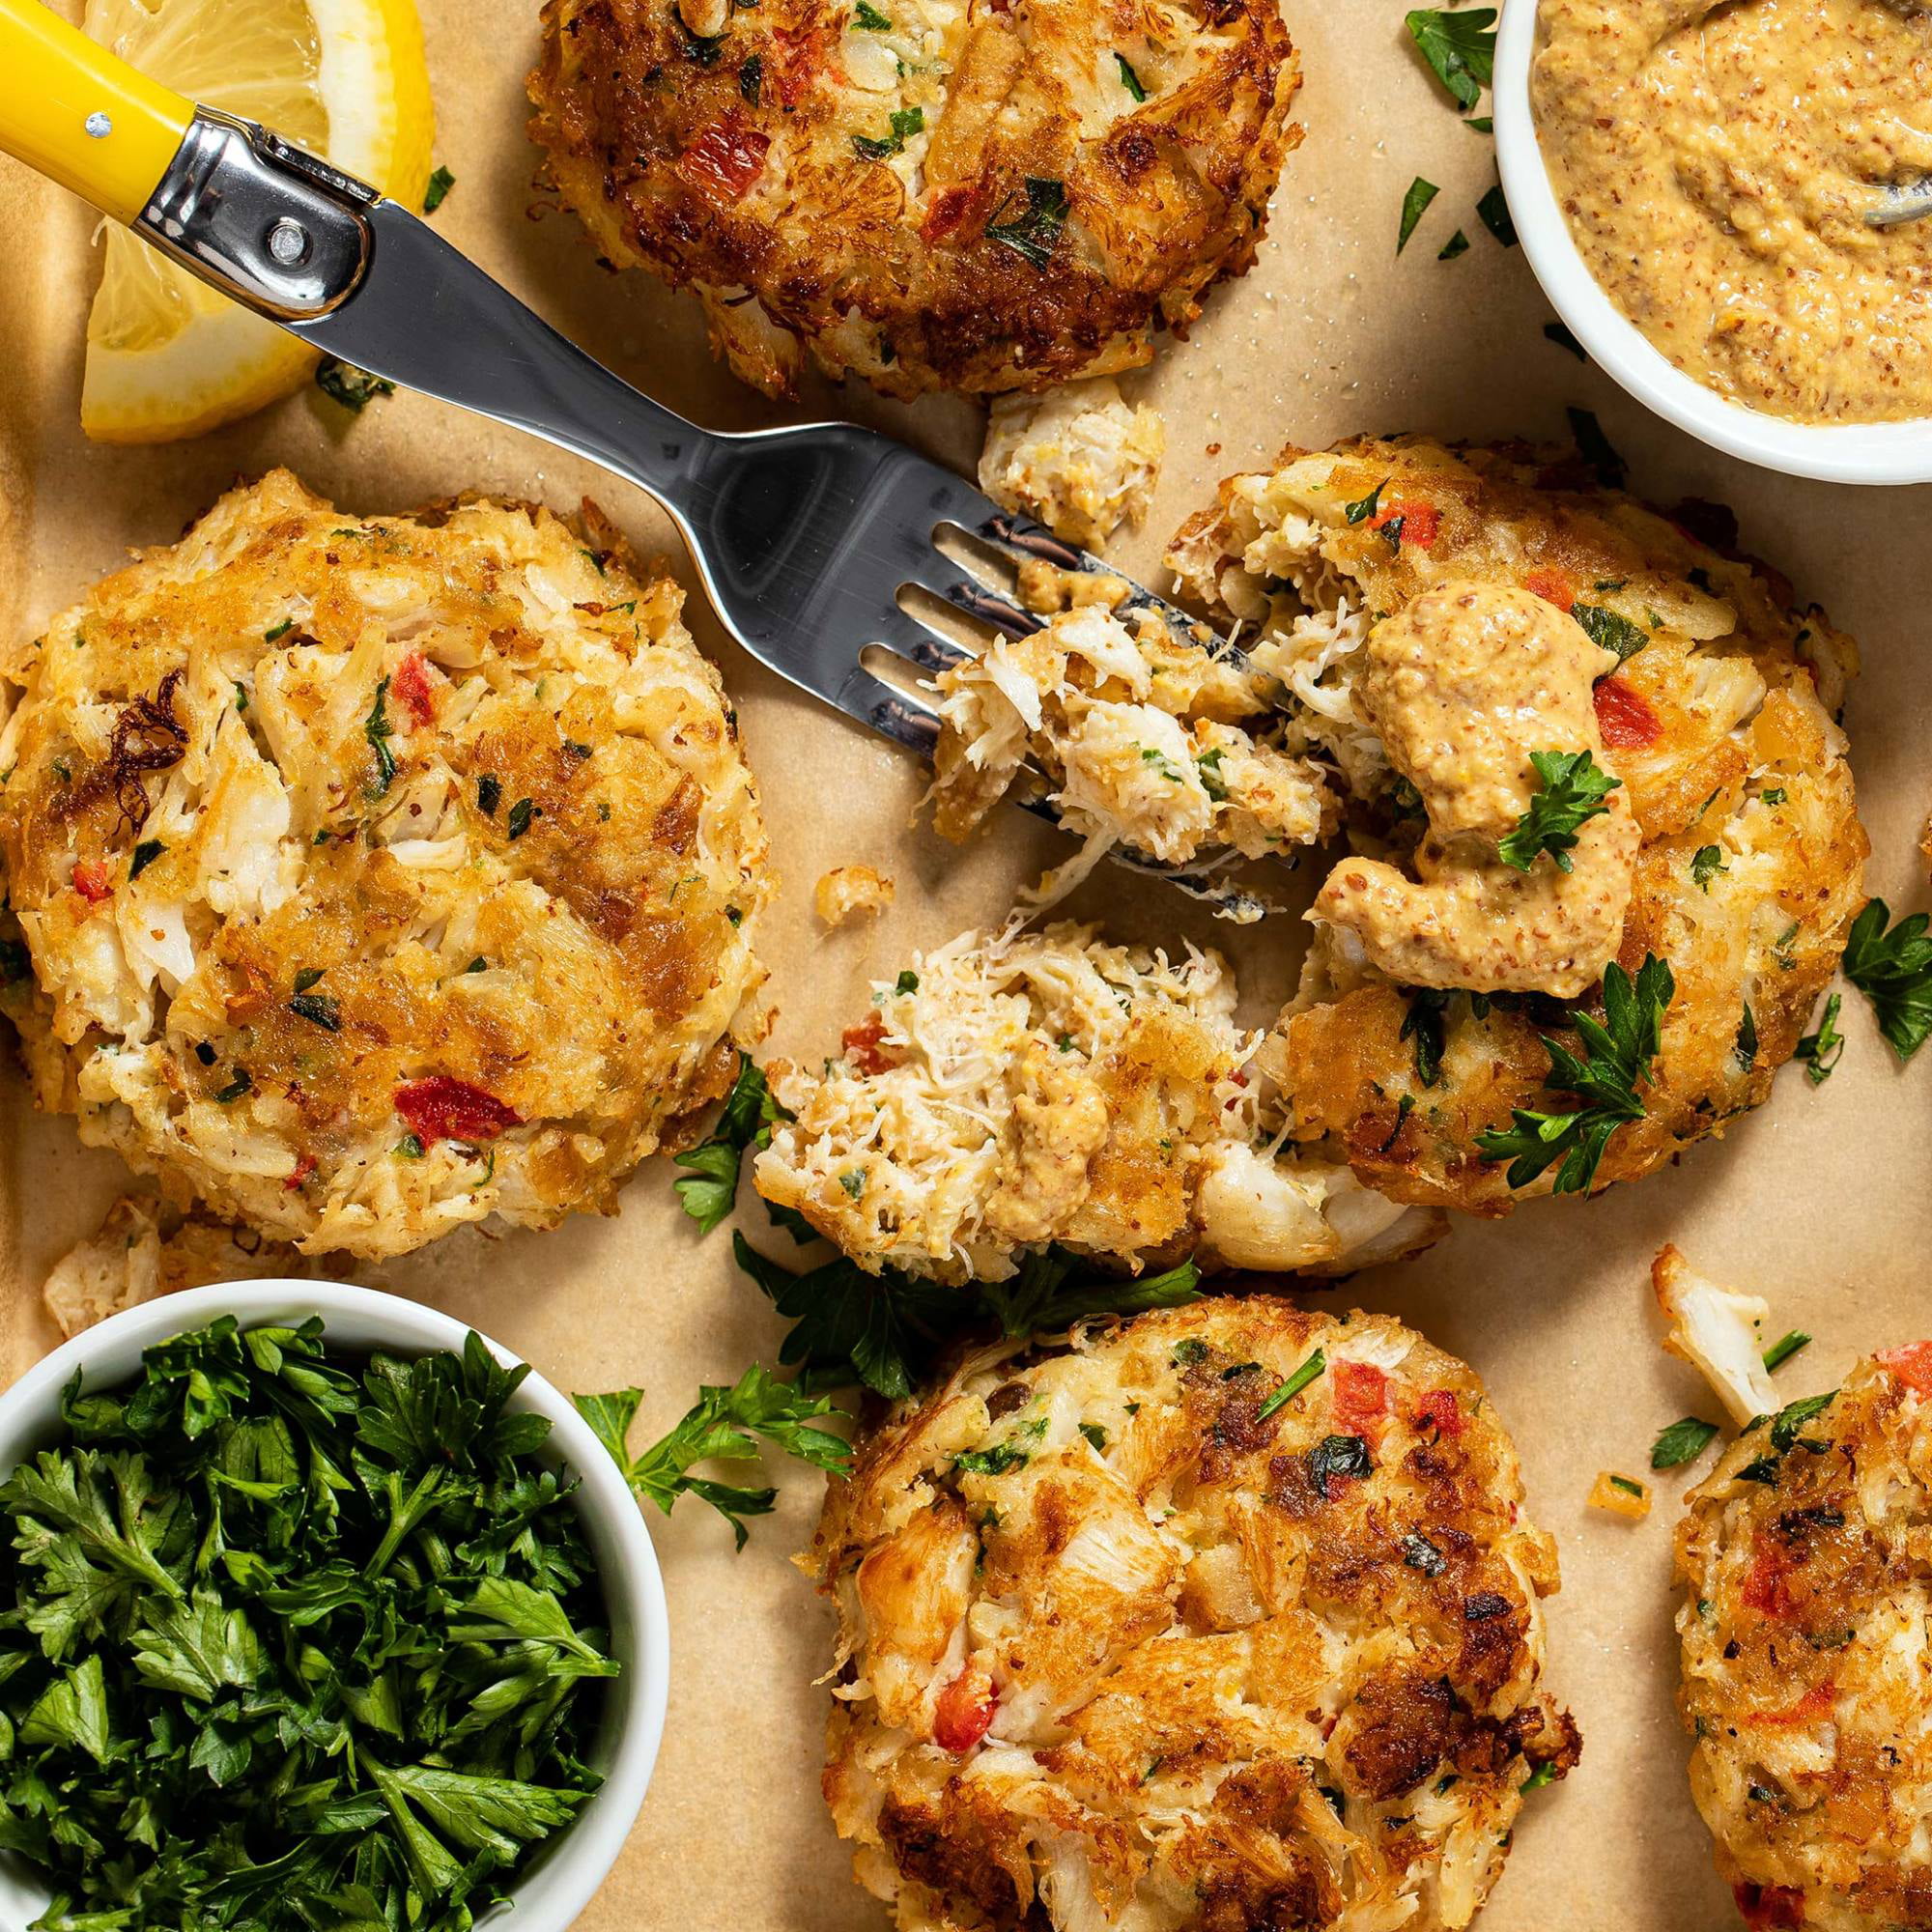 Save on Handy Crab Cakes Old Bay Seasoning - 2 ct Order Online Delivery